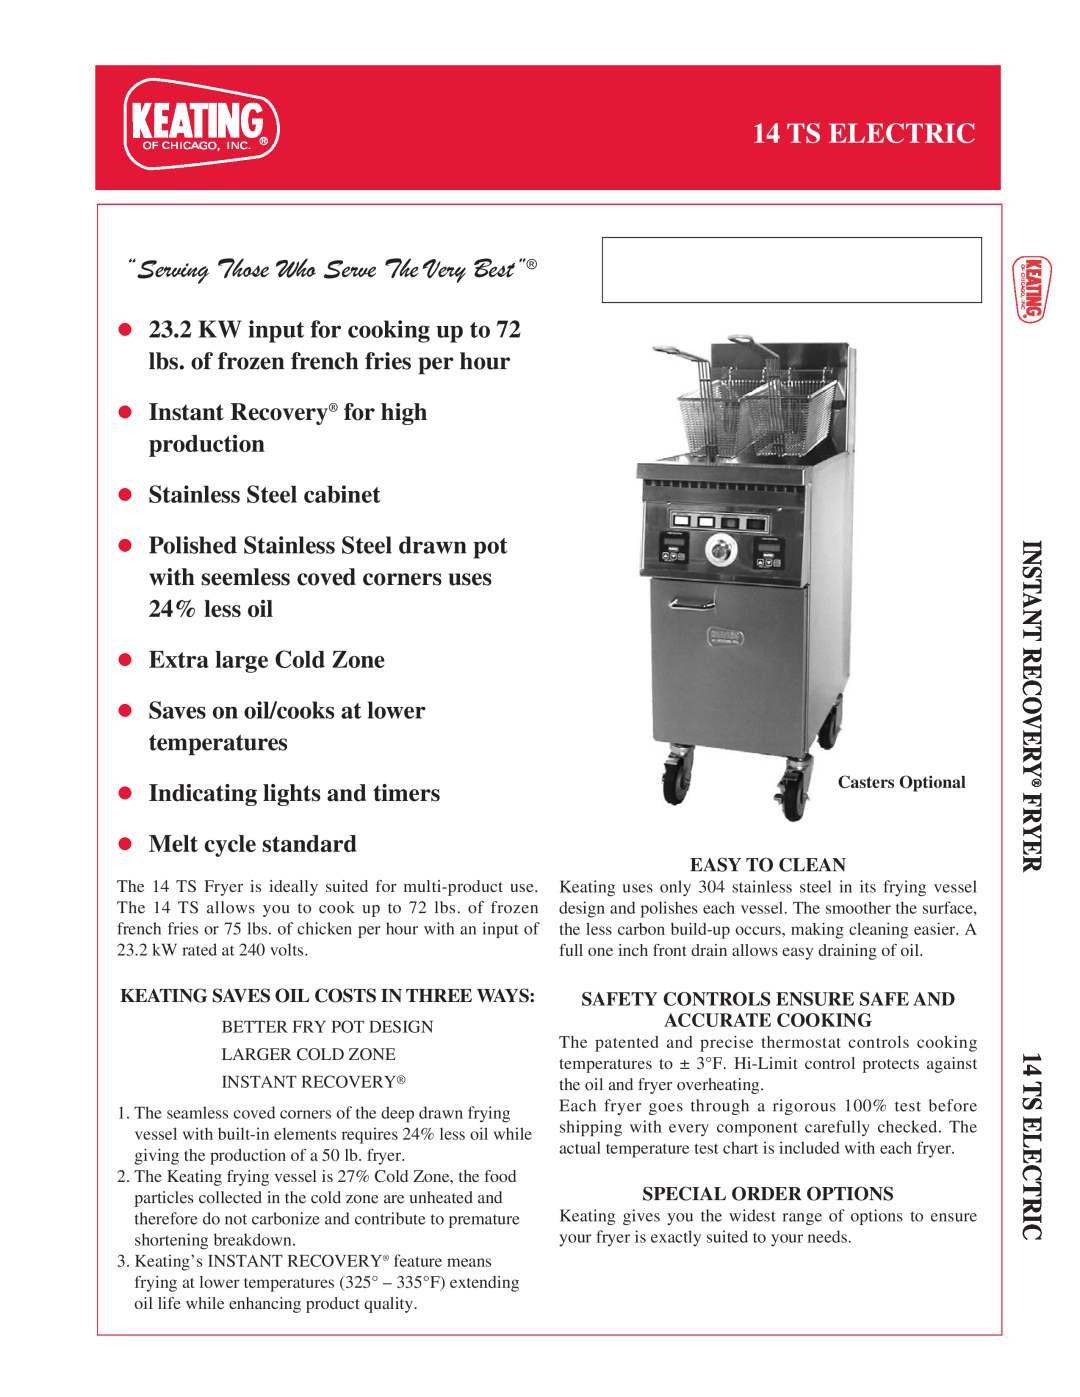 Keating Of Chicago 14 TS Electric manual Ts Electric, INSTANT RECOVERY FRYER 14 TS ELECTRIC, Stainless Steel cabinet 